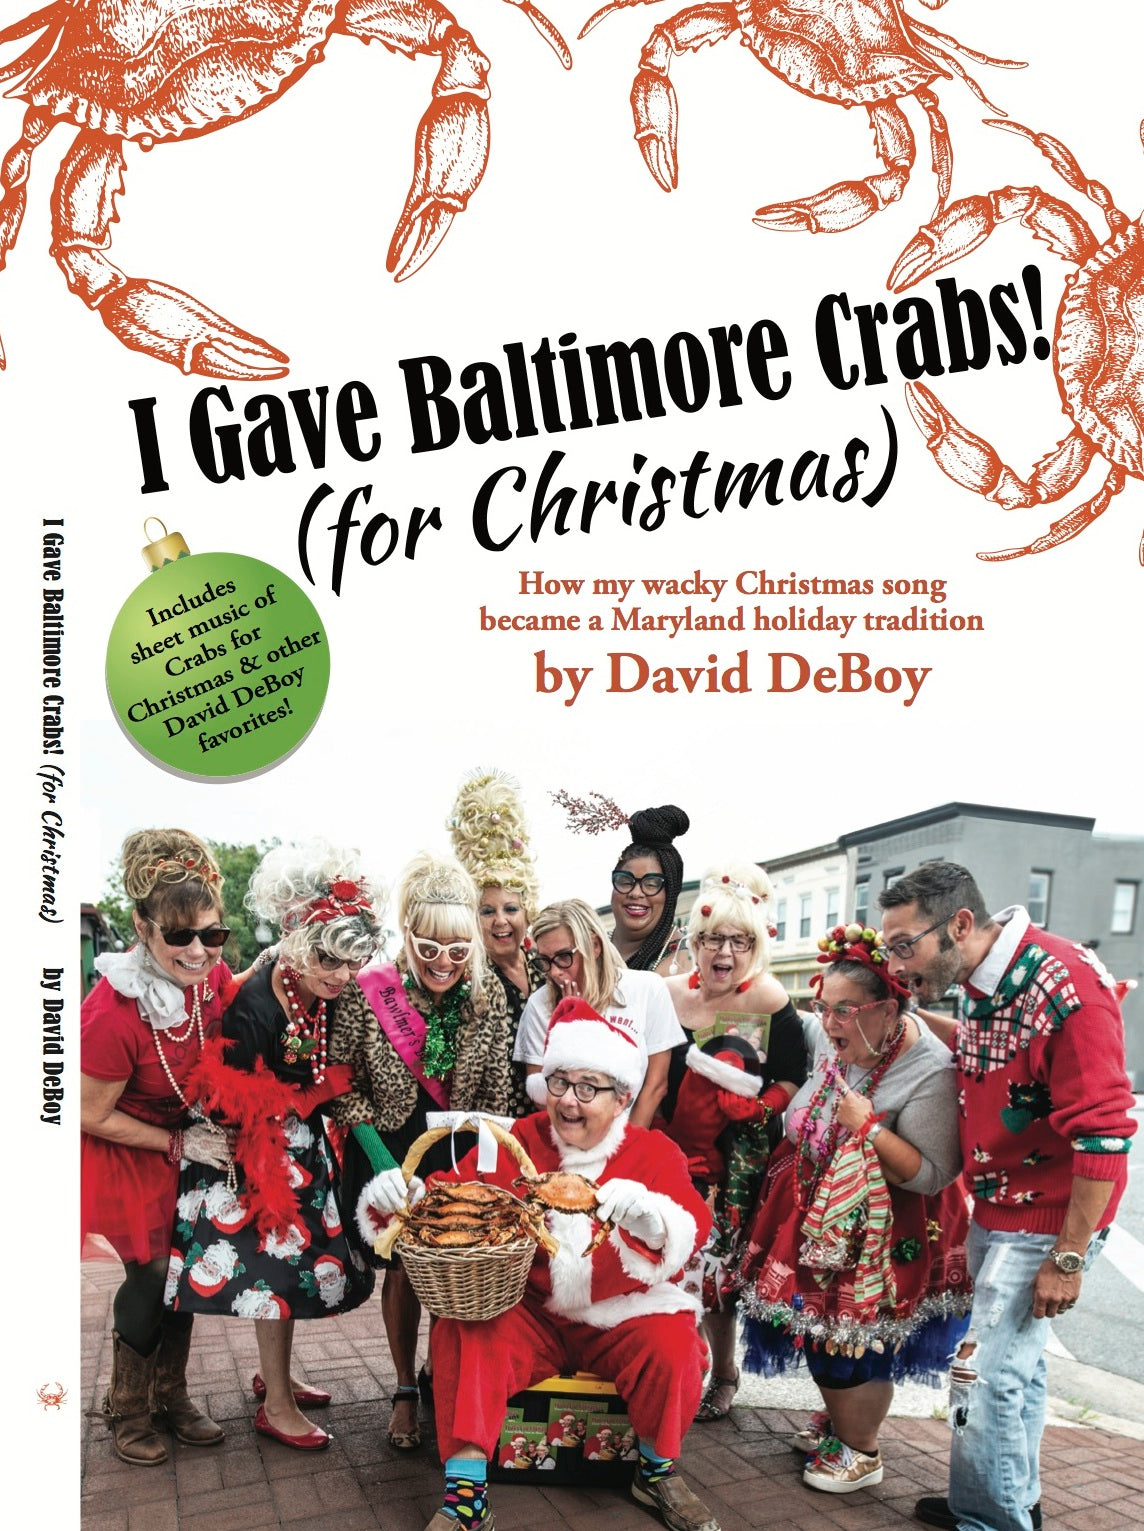 I Gave Baltimore Crabs (For Christmas) / Book - Route One Apparel